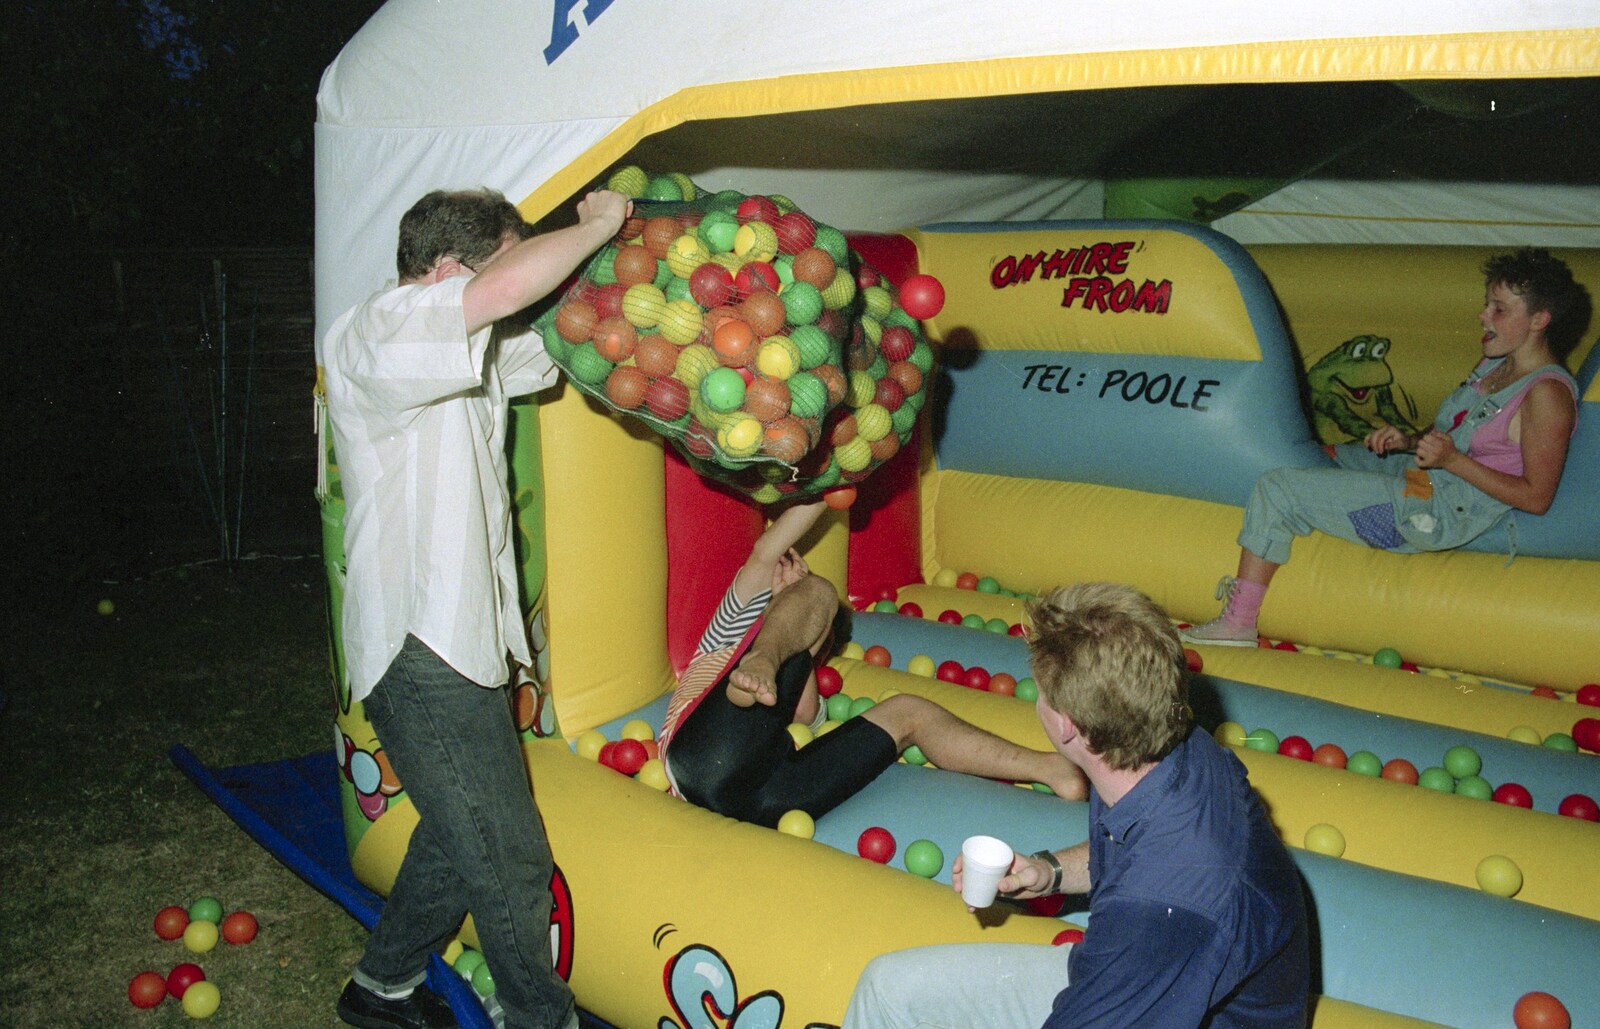 Chris and Phil's Party, Hordle, Hampshire - 6th September 1989: Hamish adds a few more balls to the bouncy castle